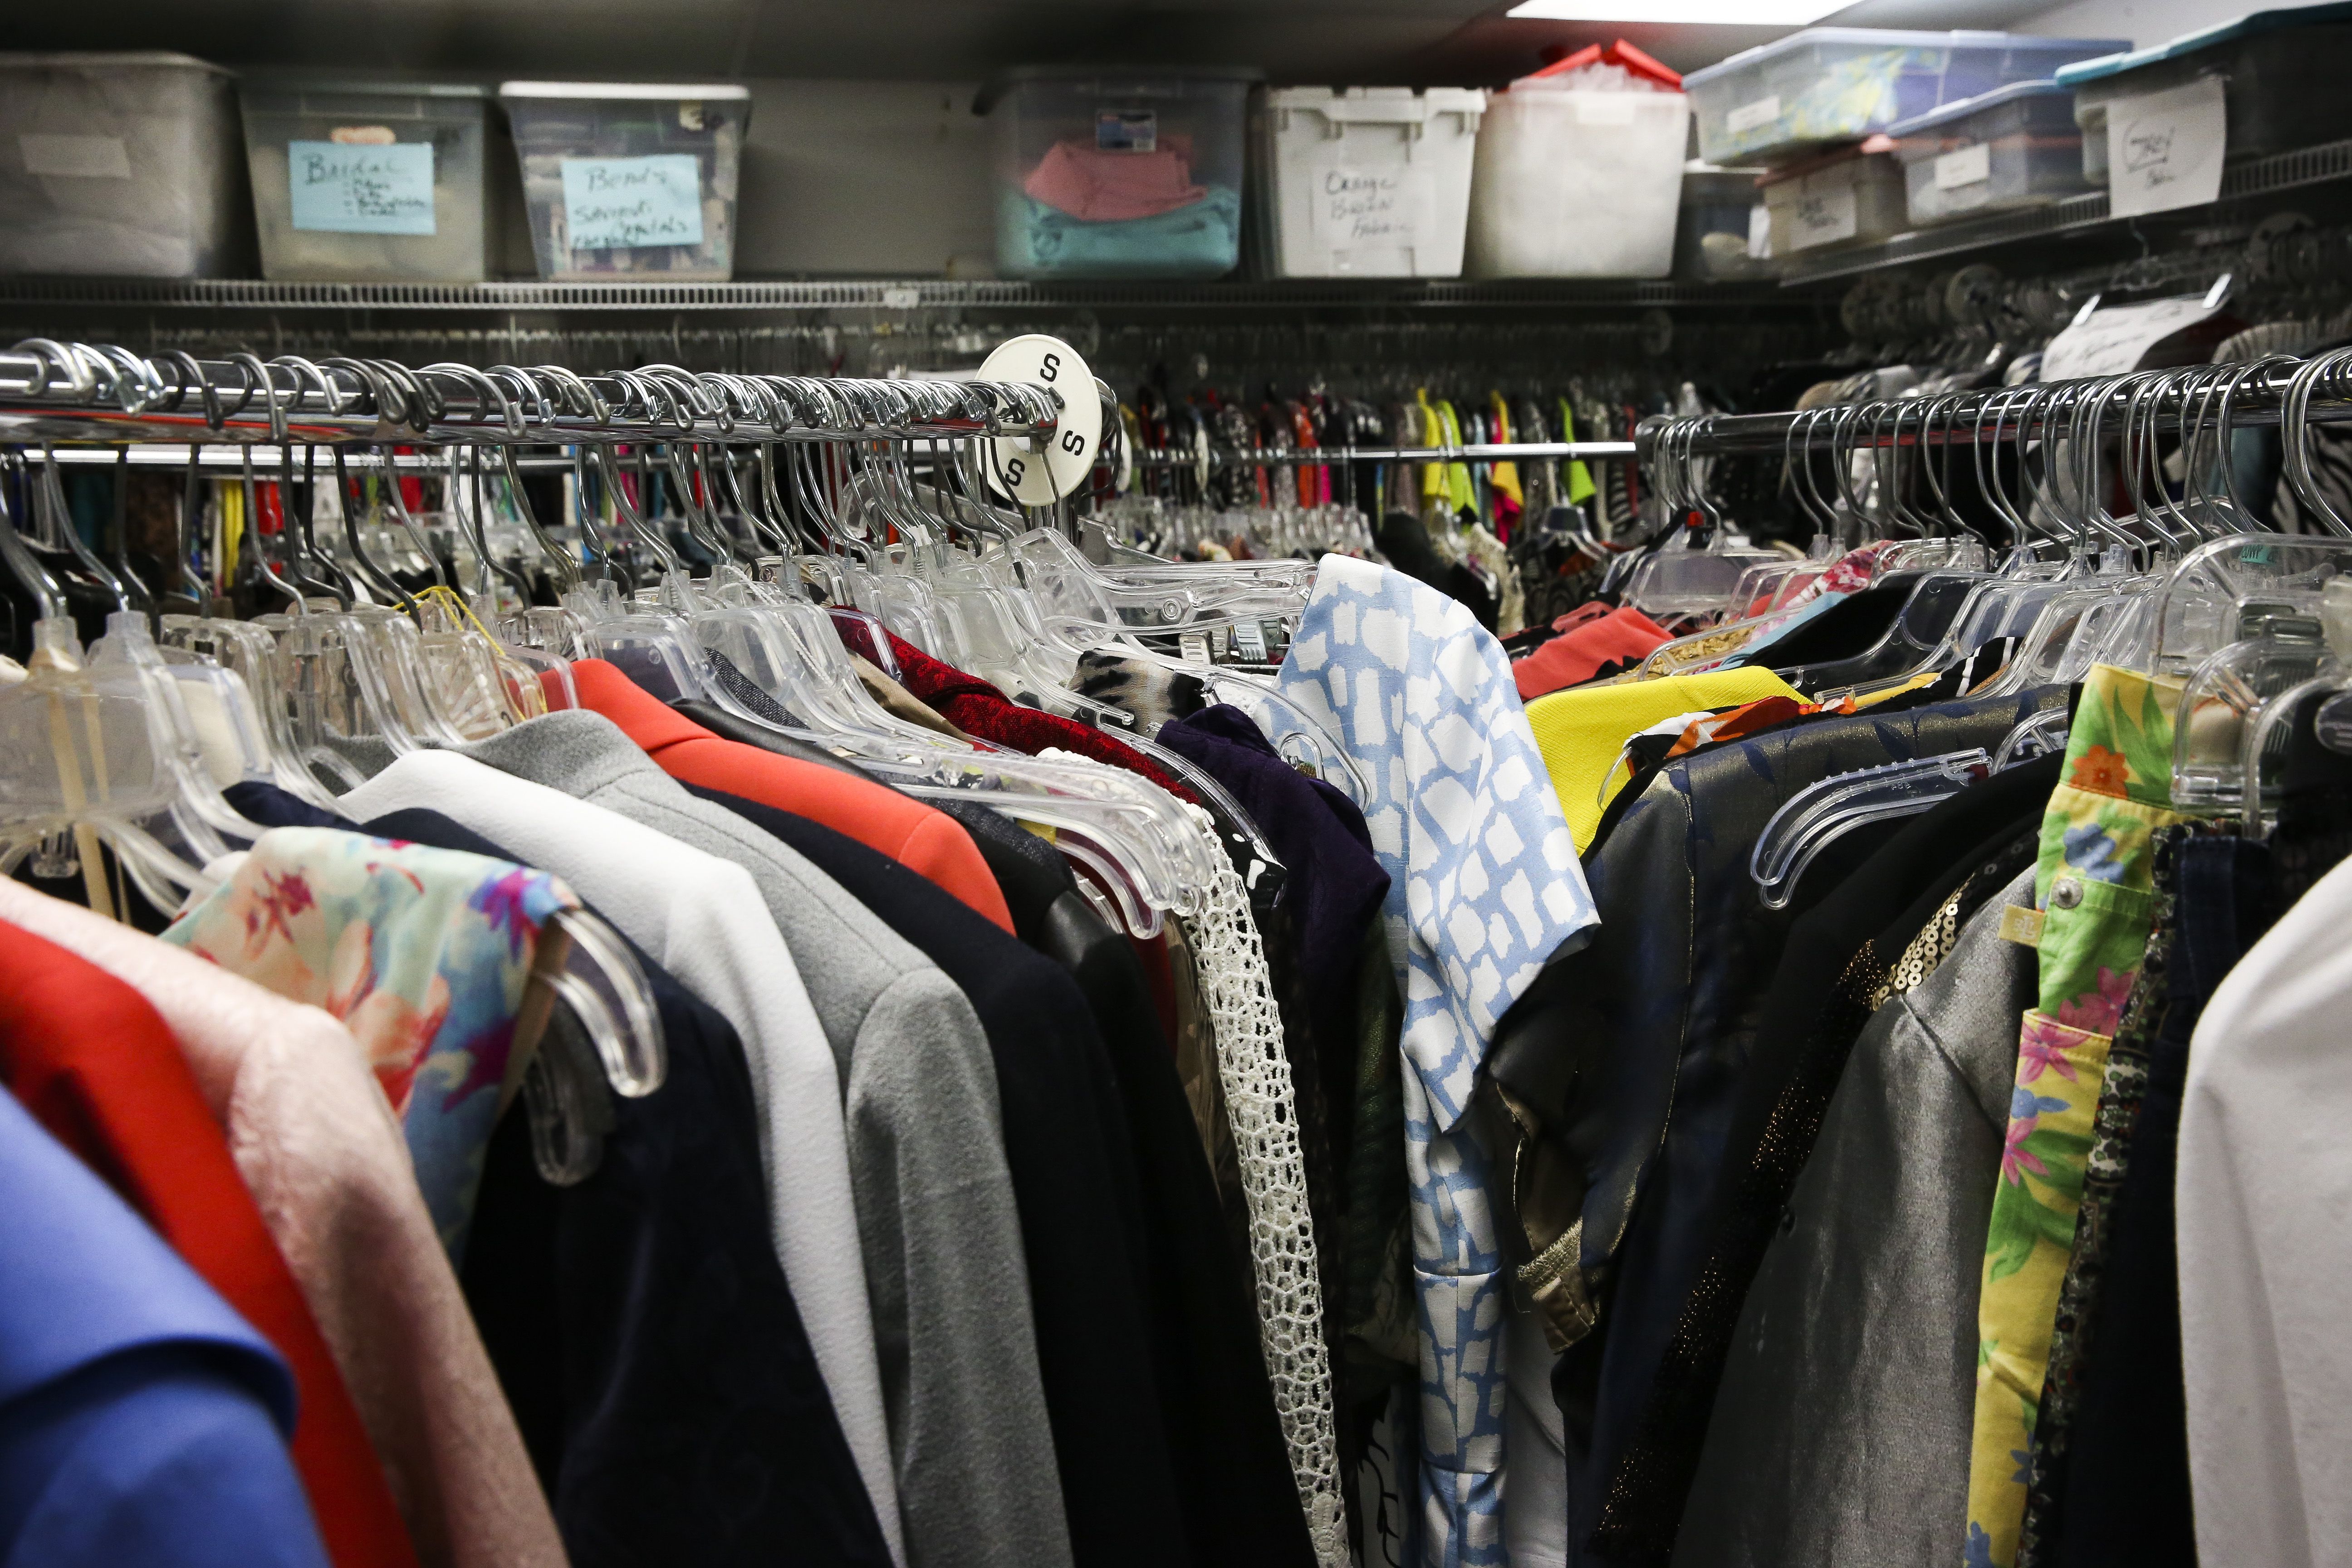 One-Eighty Consignment & Thrift Shoppe